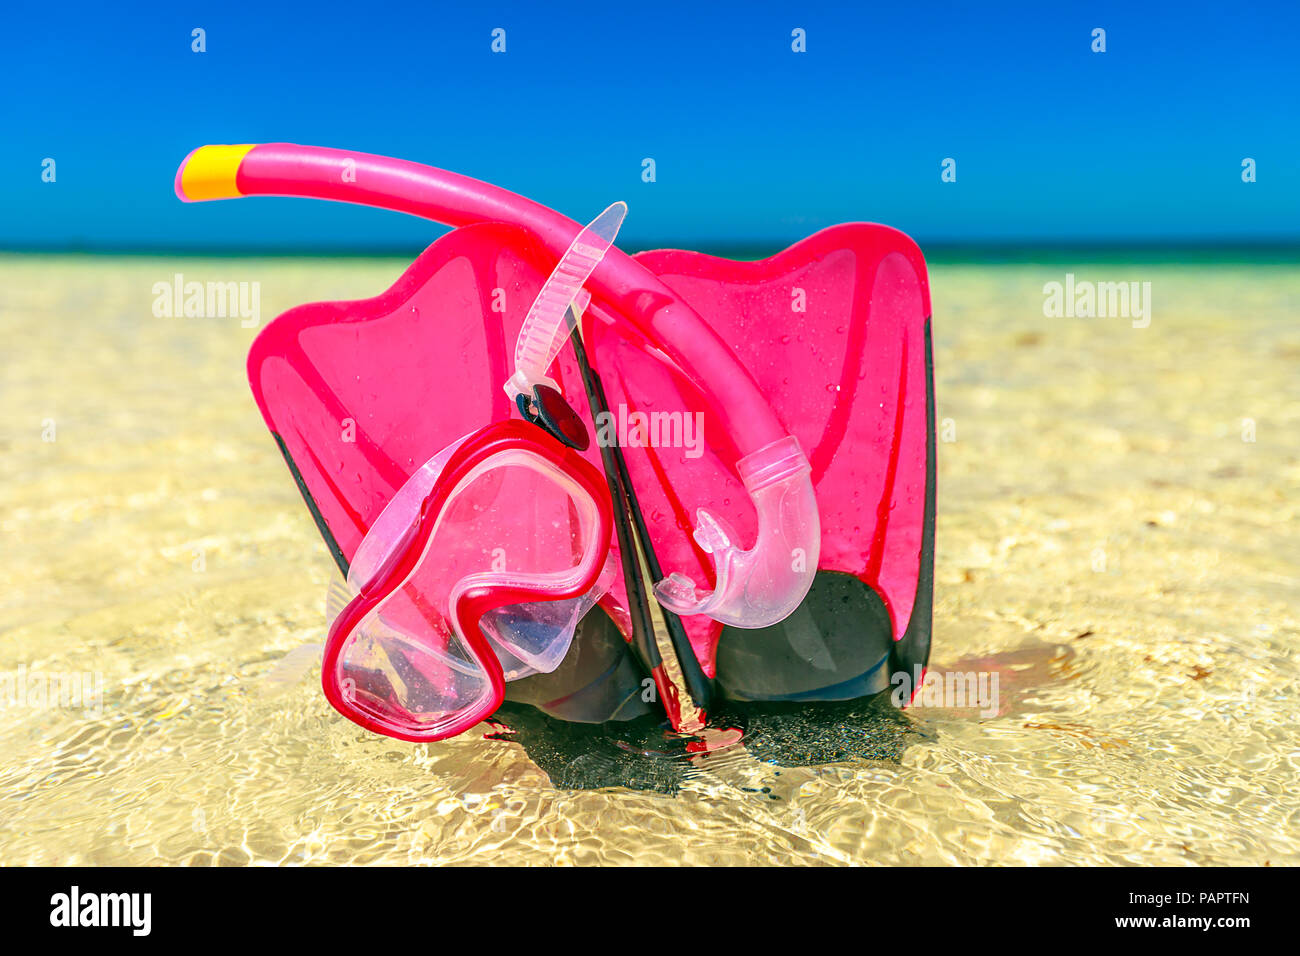 Close-up of scuba mask with fins in pink color on the sand of Hangover Bay in Nambung National Park, Western Australia. Blue sky. Summer equipment for snorkeling. Stock Photo